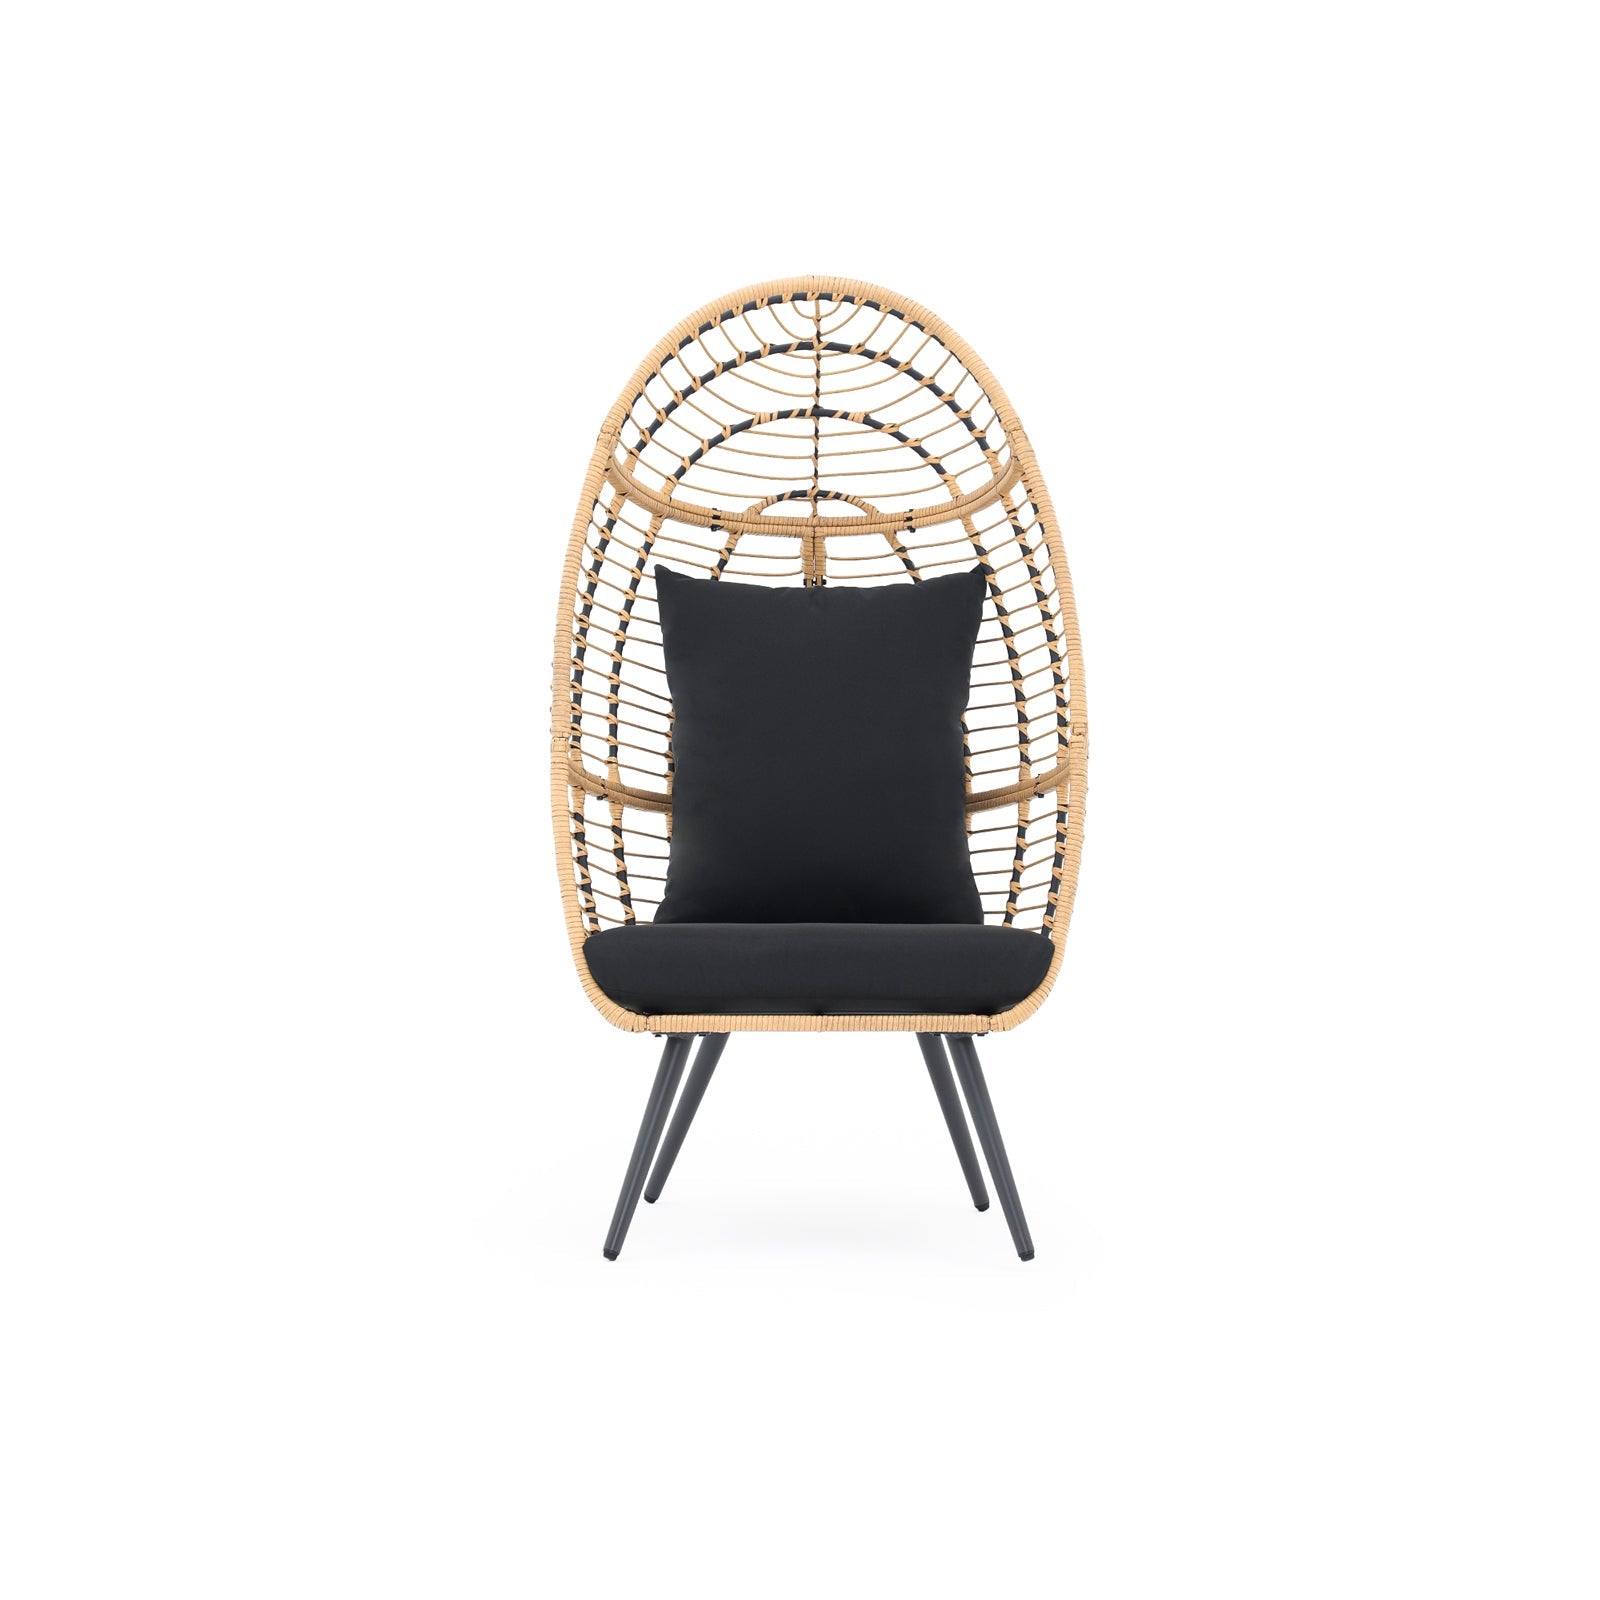 Oia Egg Chair with 4 metal legs stands, Natural Rattan Design, black seat and back cushions, front view - Jardina Furniture